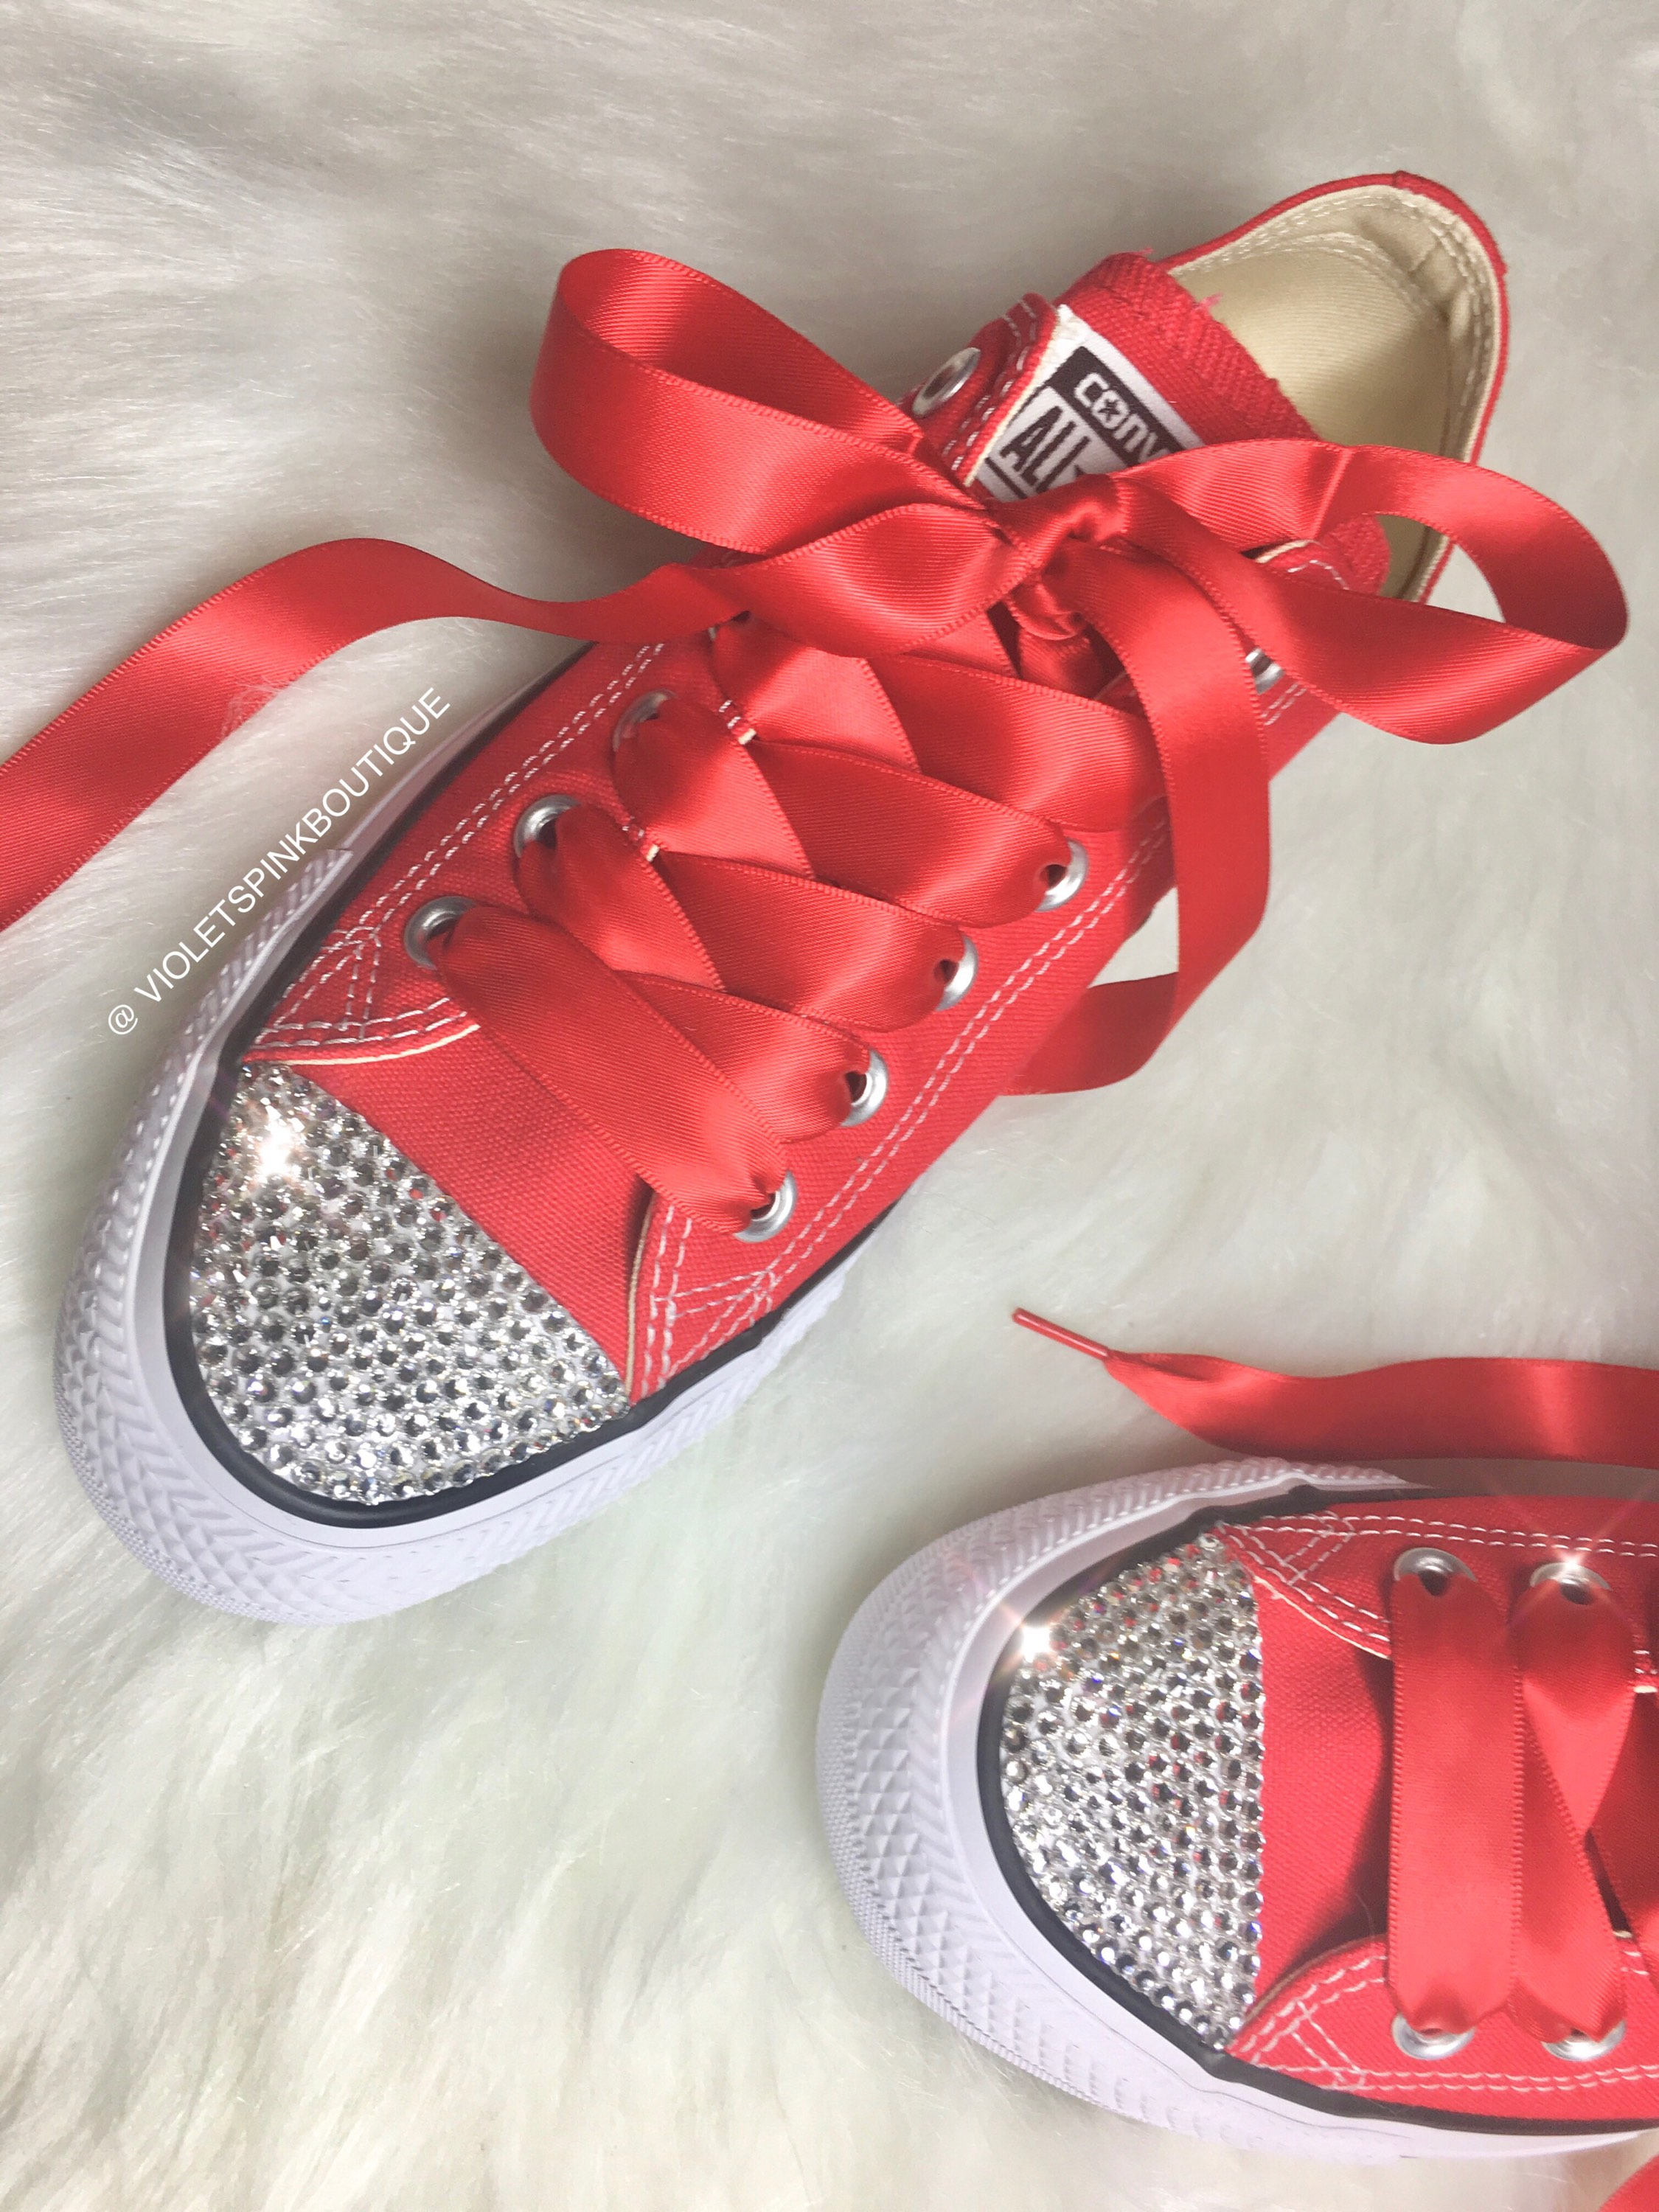 CONVERSE Bling Women's Red Chucks Sneakers With Satin | Etsy